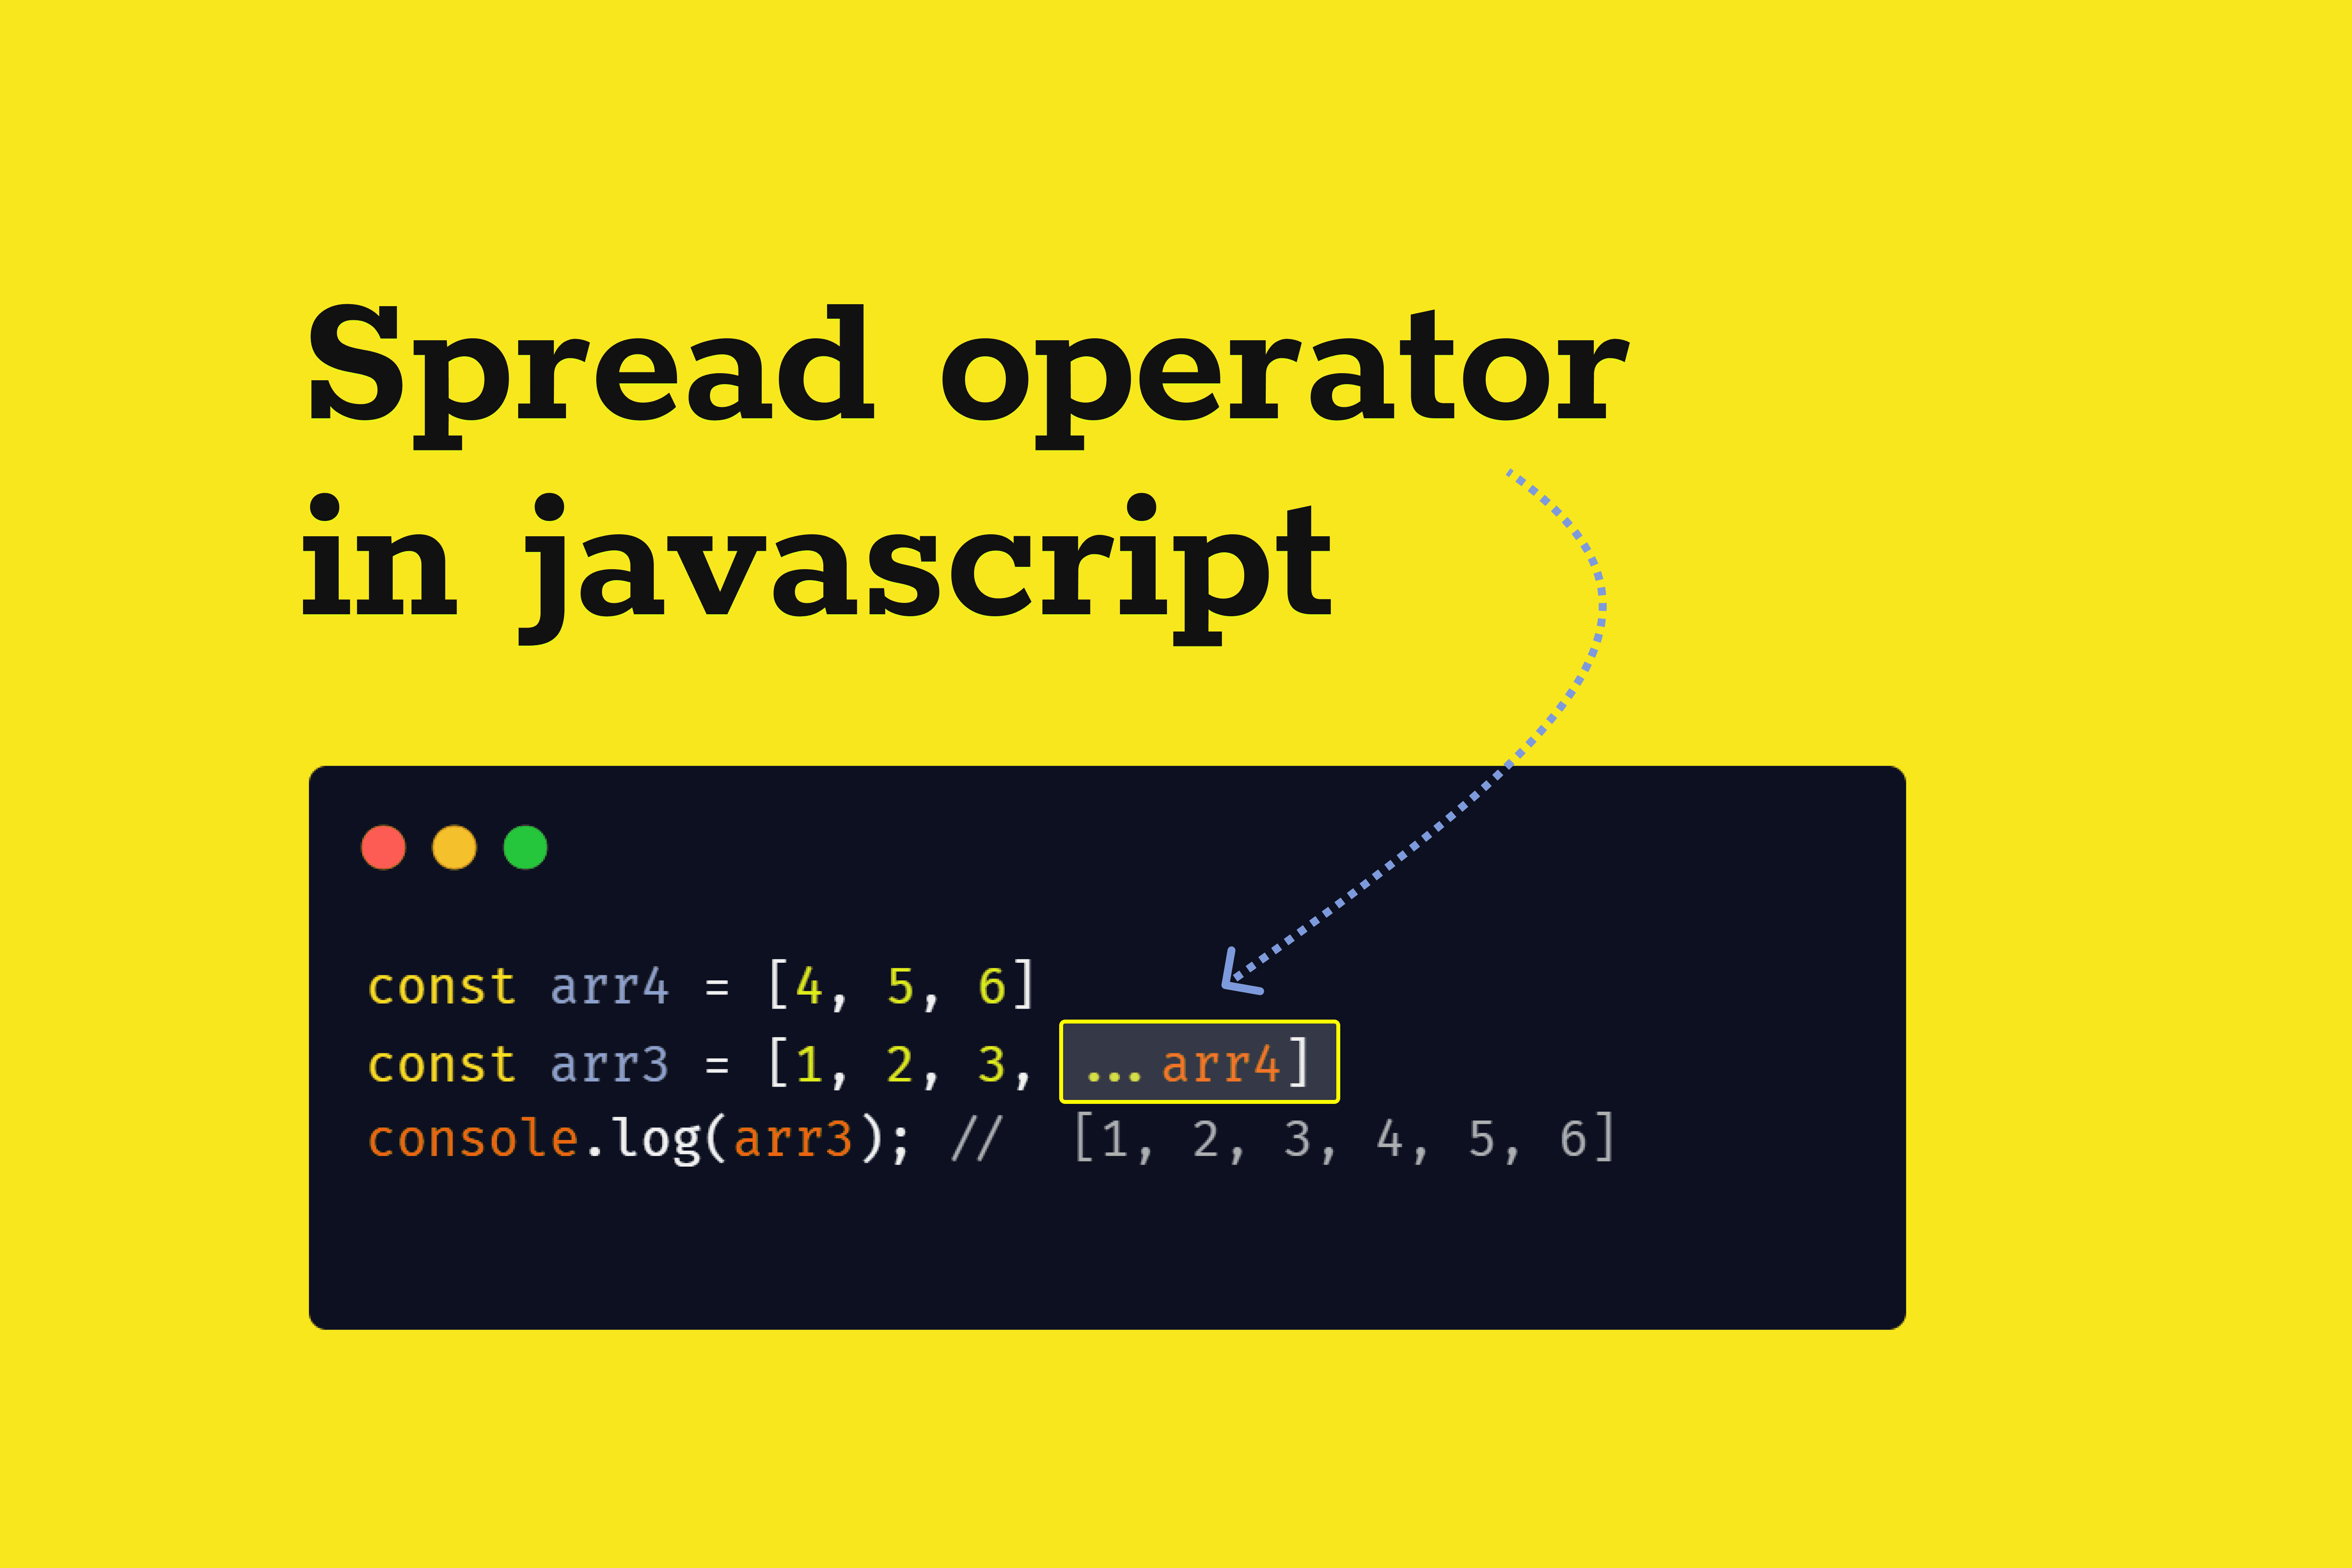 Spread and rest parameters in js